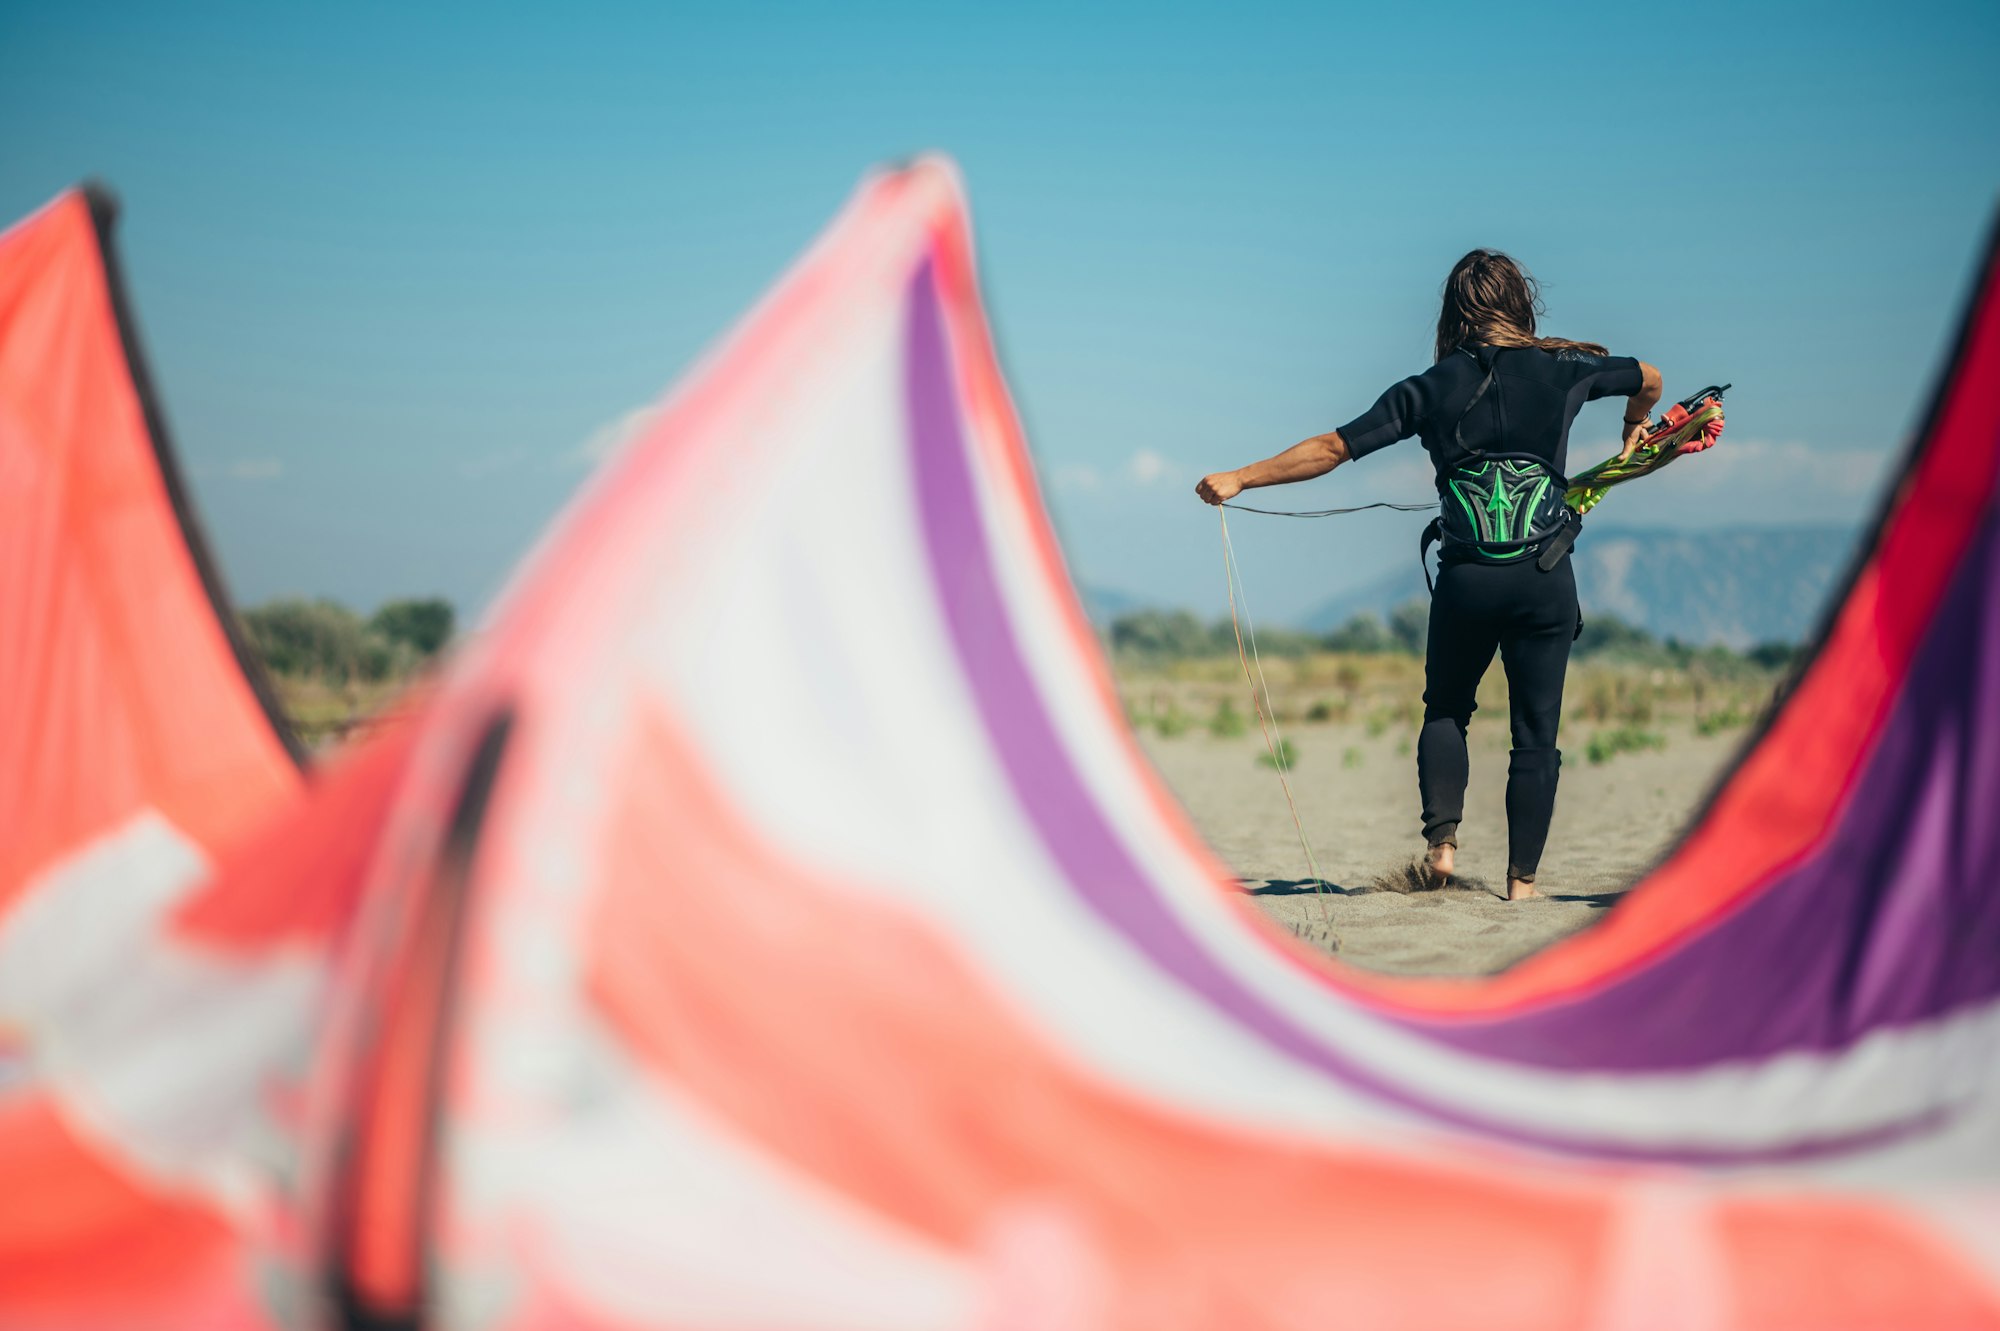 Woman using flying lines and a control bar for kitesurfing